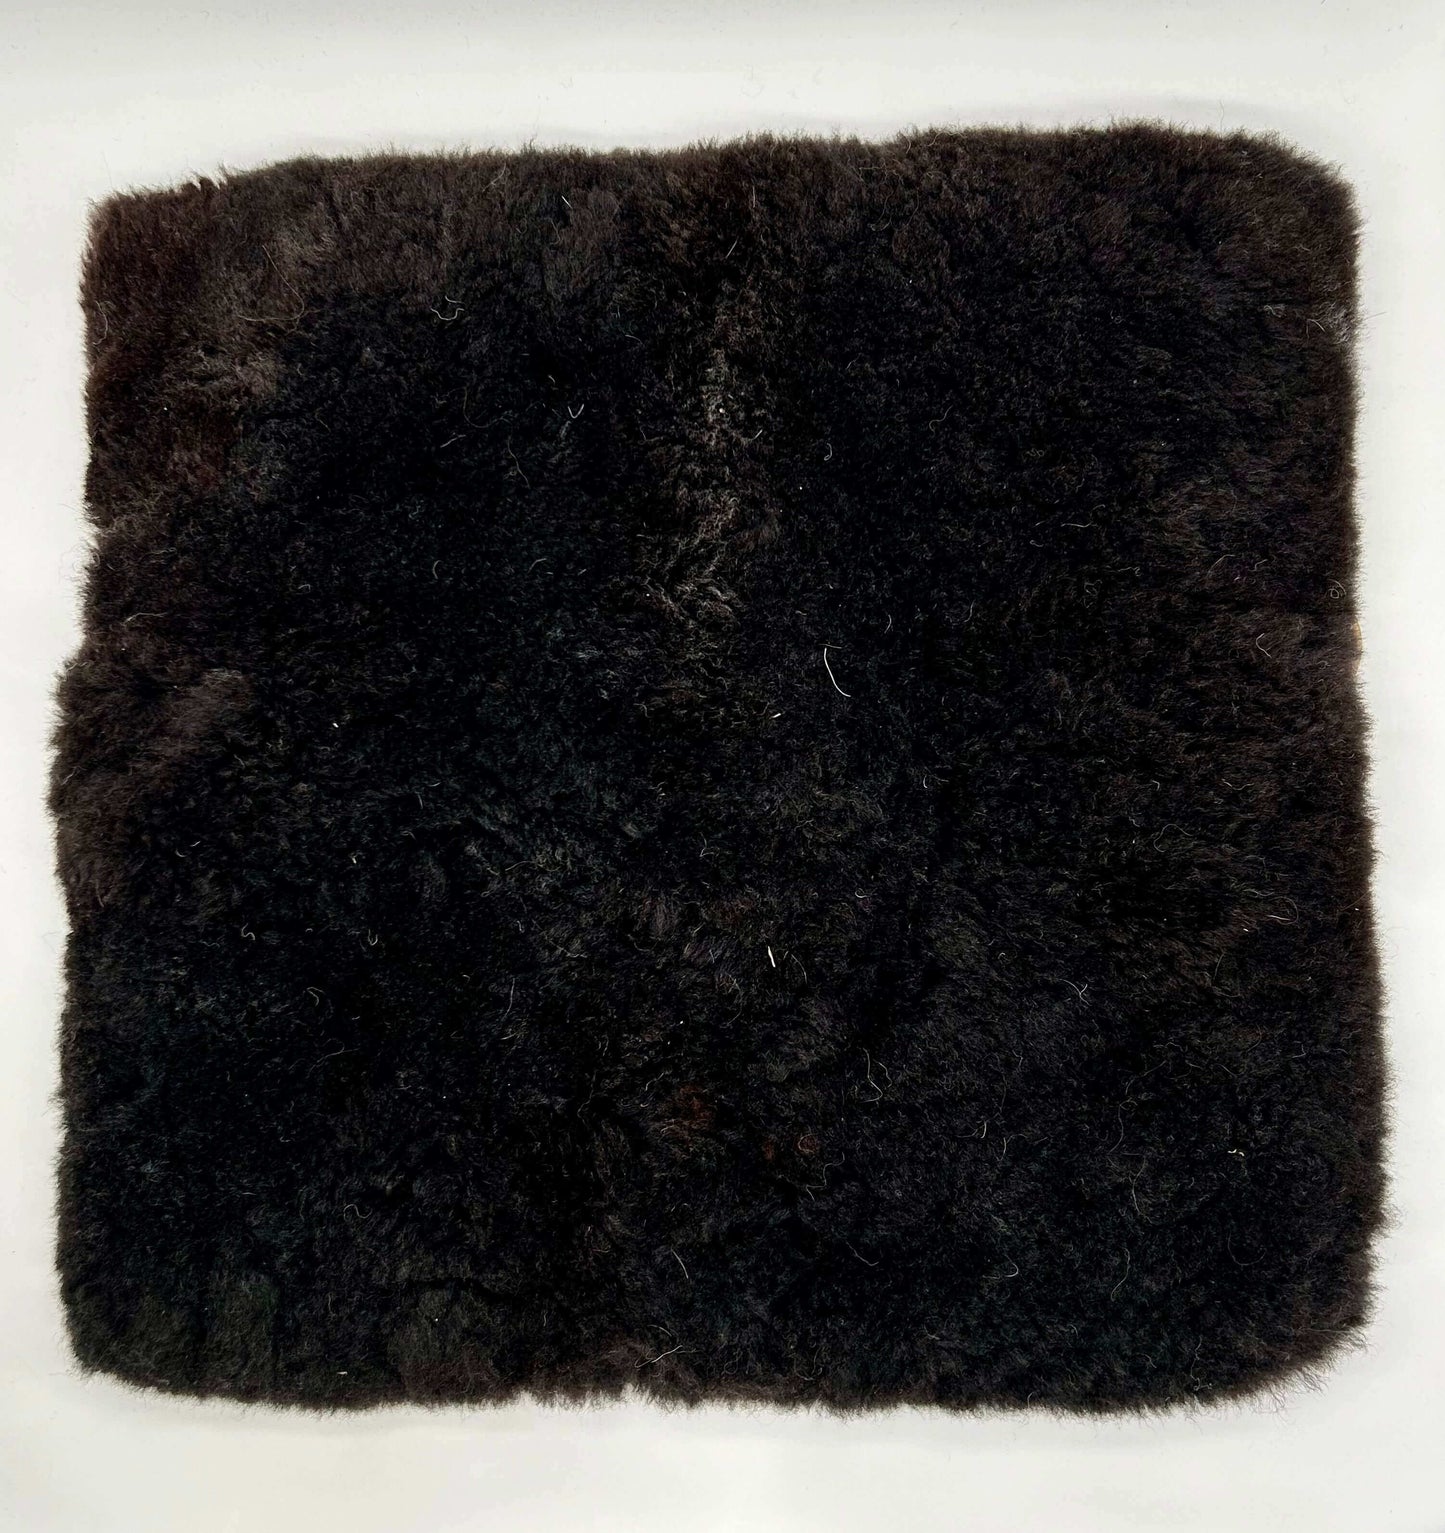 Cuddly soft cushion cover made from natural alpaca wool Fluffy & Luxurious | Brown real alpaca fur in 40x40cm